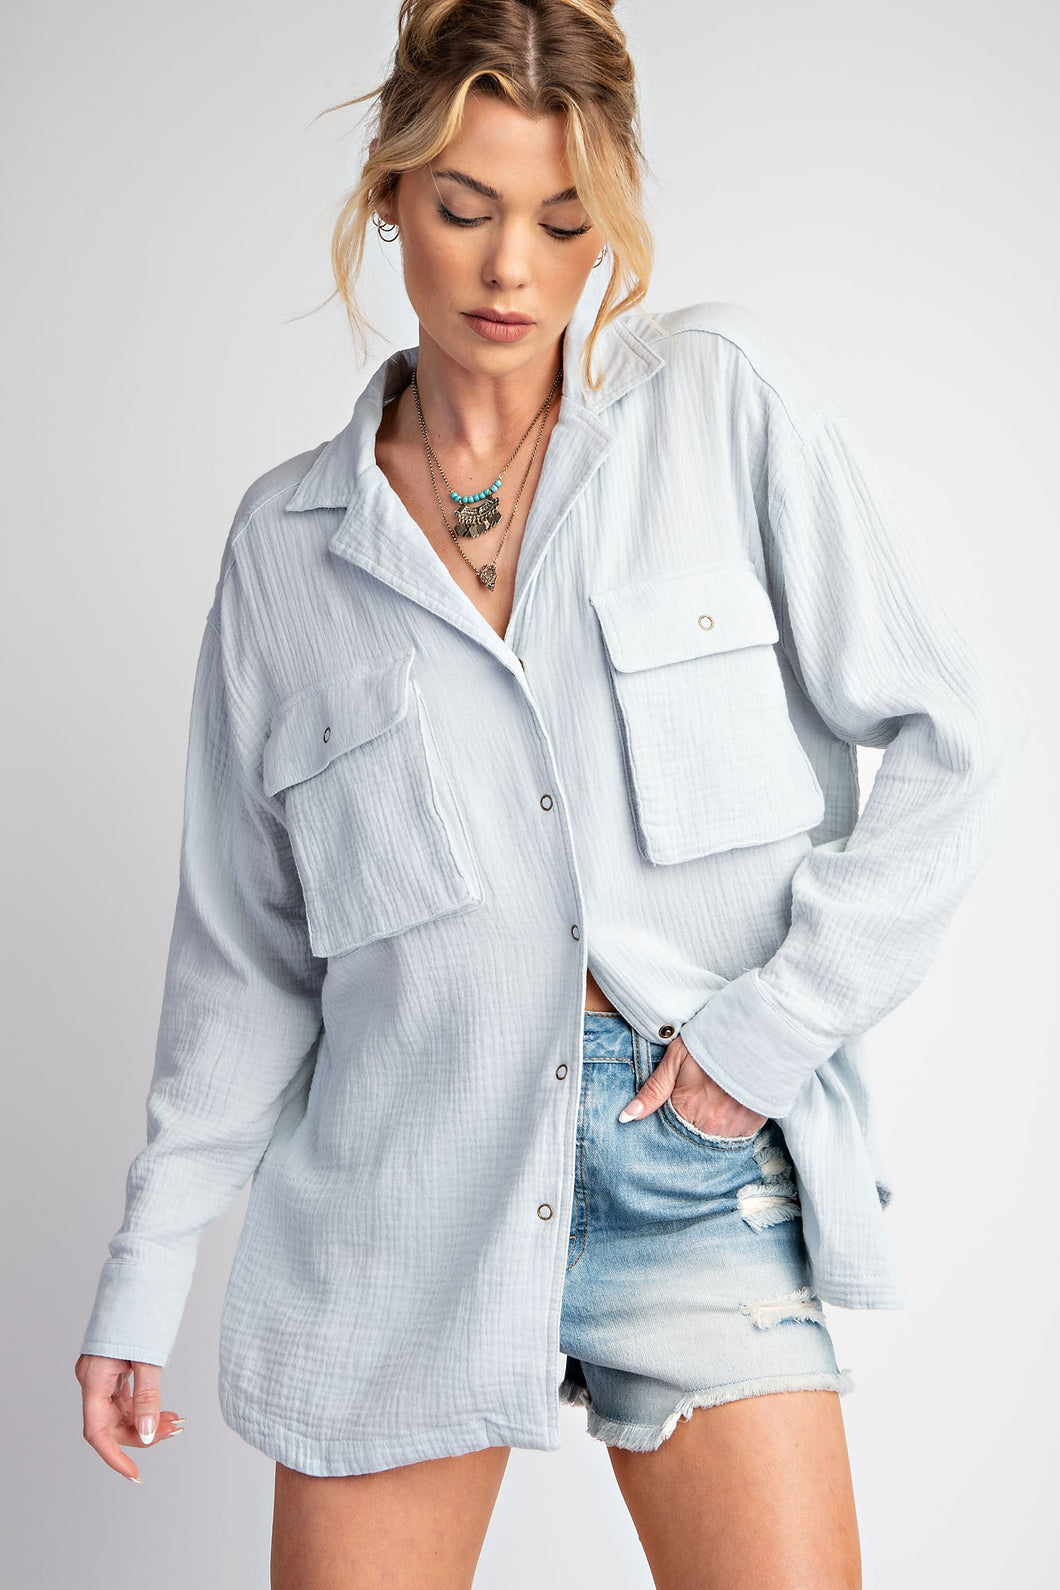 Easel Cotton Gauze Button Down Top in Powder Blue Shirts & Tops Easel   